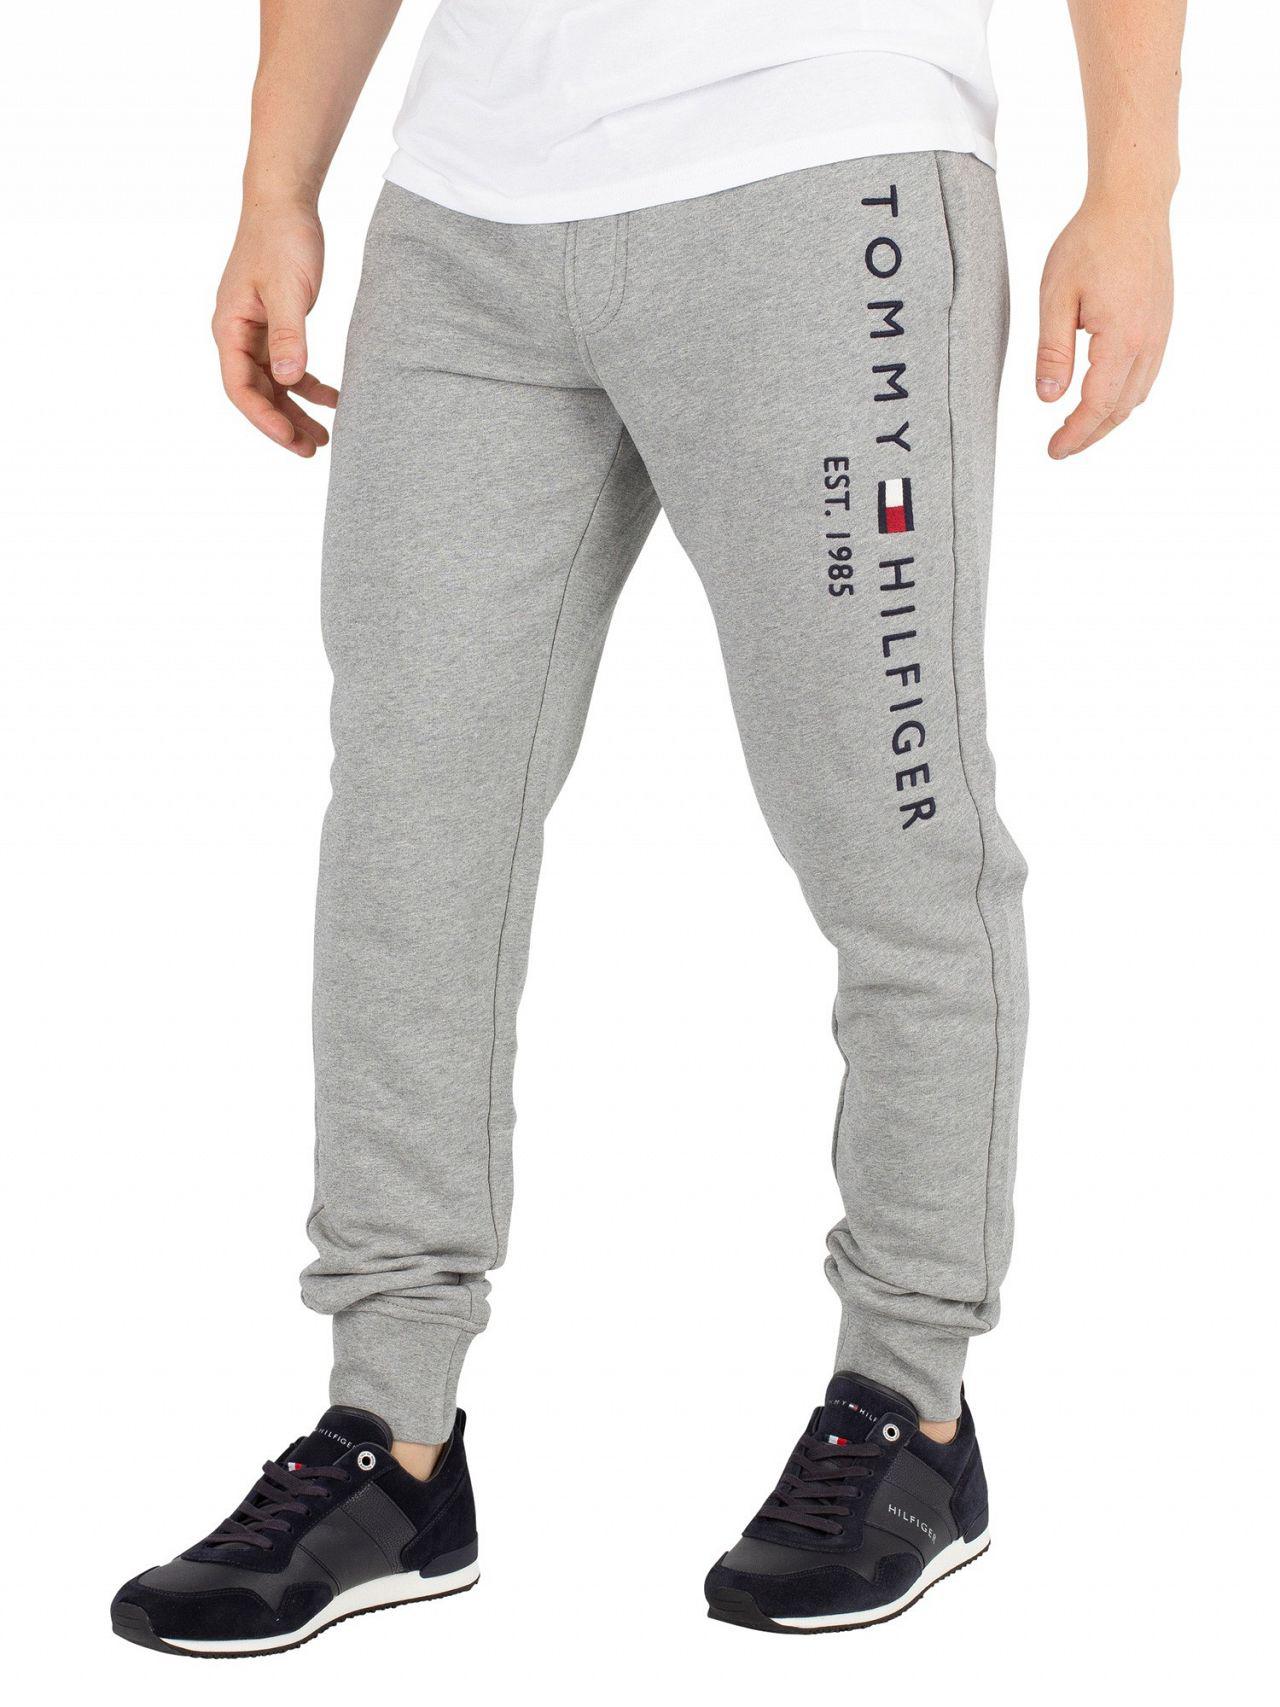 Tommy Hilfiger Grey Joggers Cheap Sale, SAVE 50%.